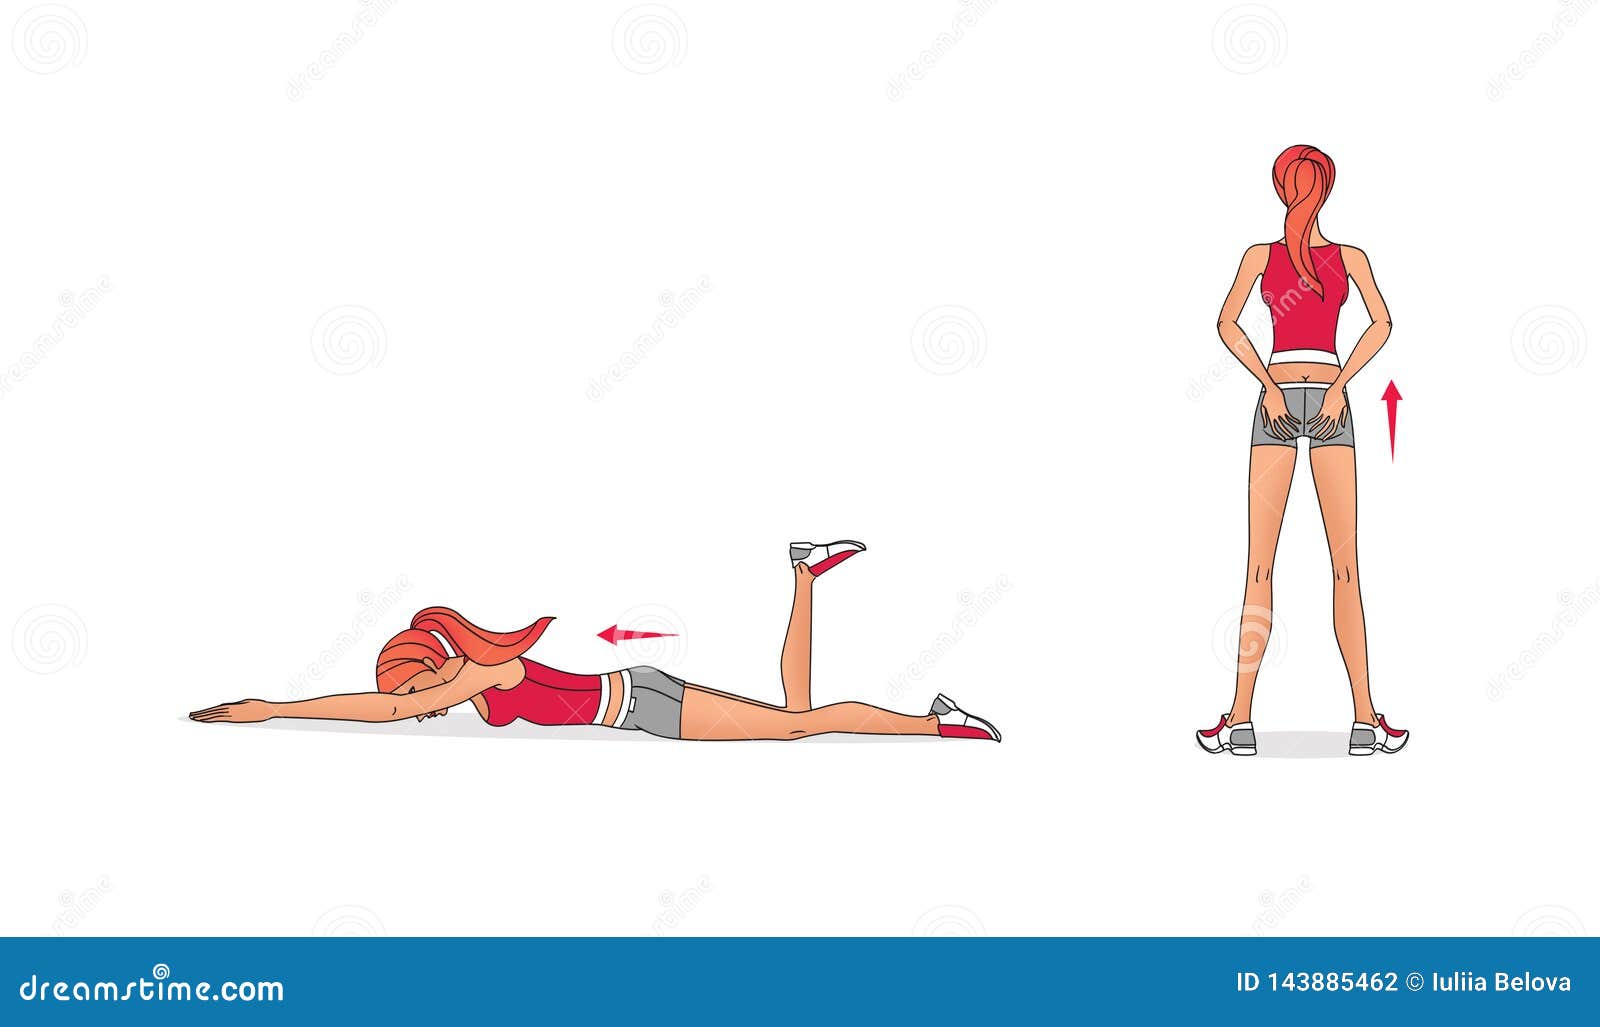 Young Girl Is Training Exercises To Strengthen The Muscles Of The